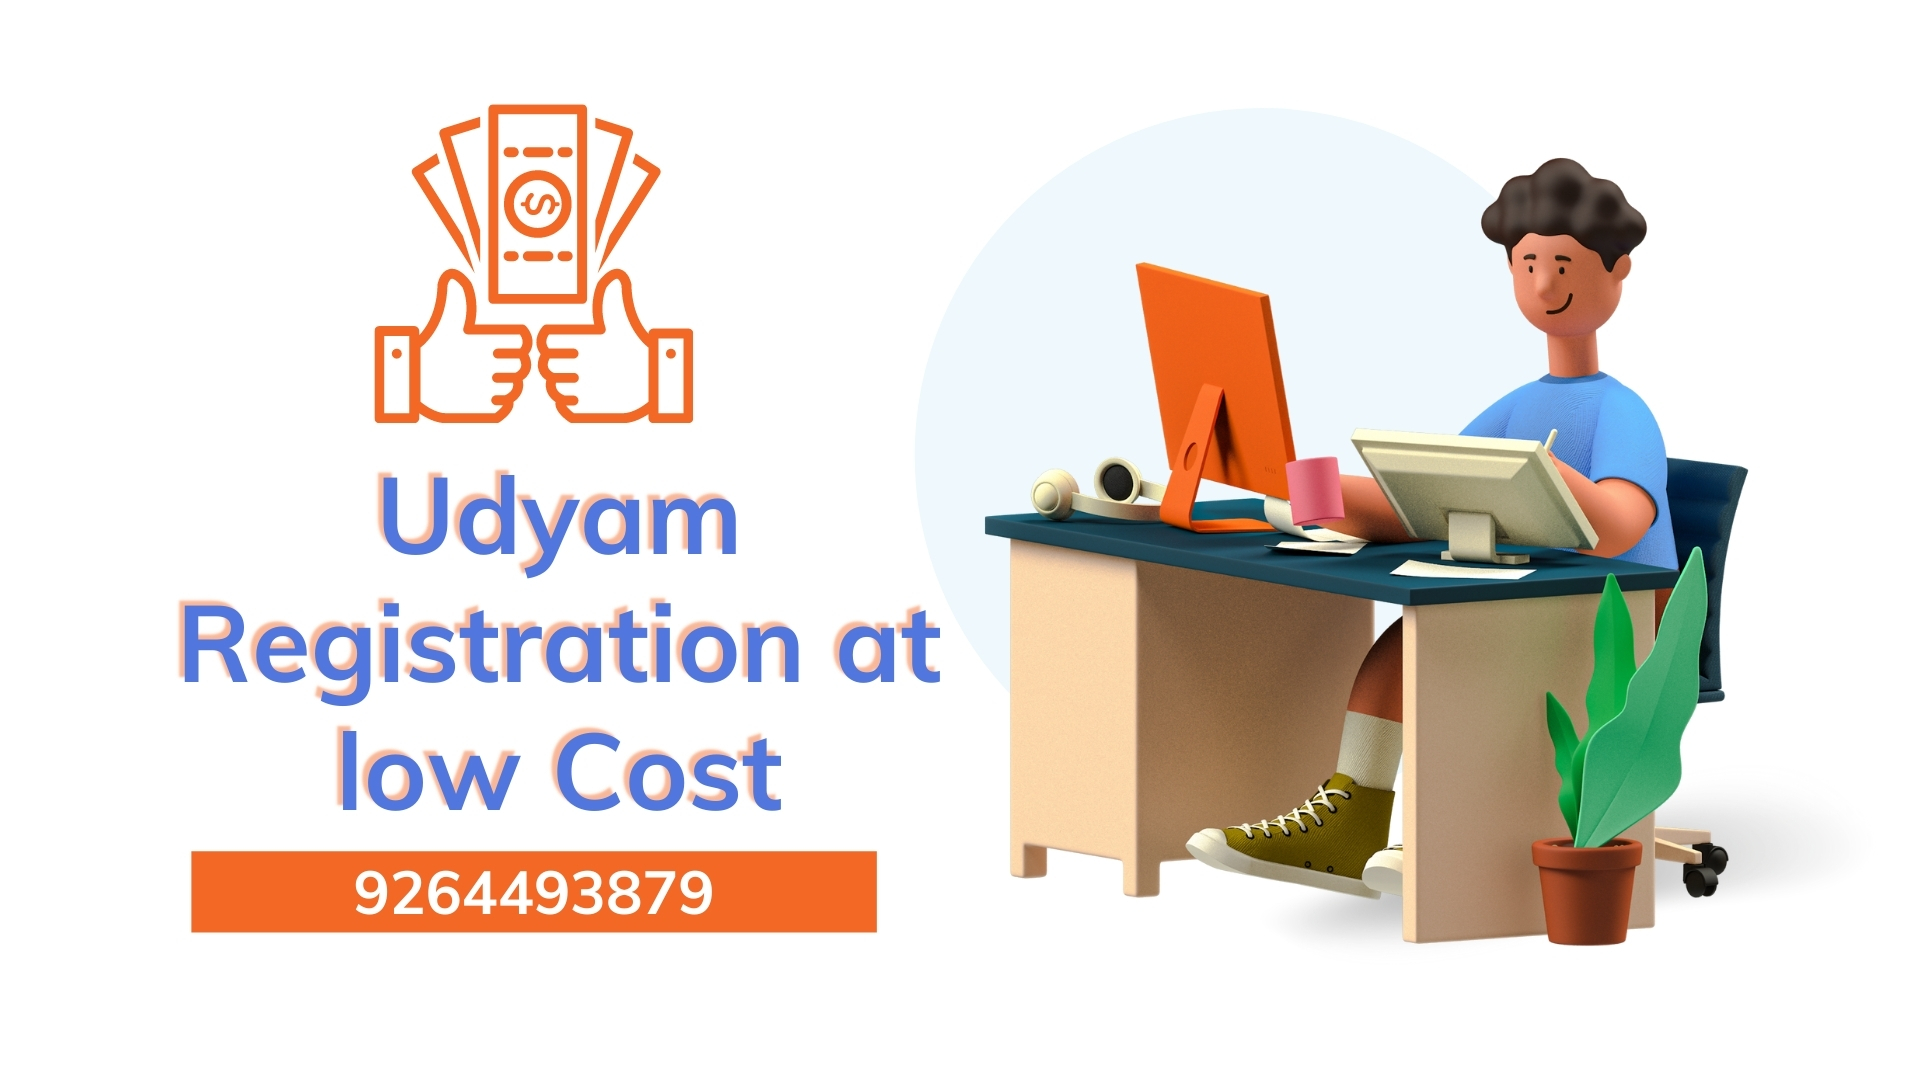 Udyam registration at low costServicesEverything ElseAll IndiaAmritsar